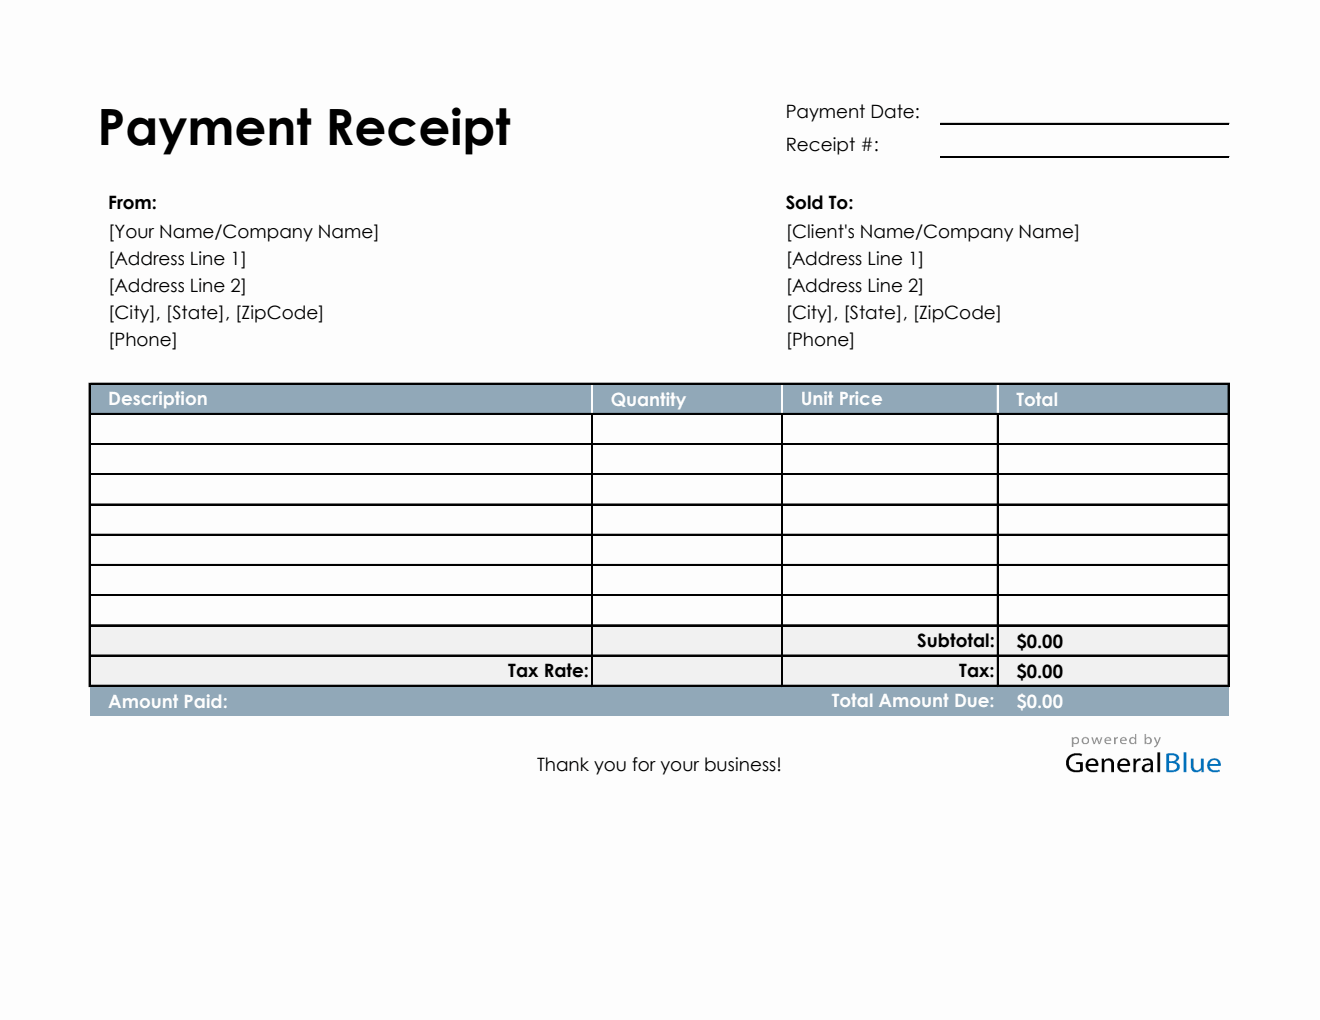 Payment Receipt Template in Excel (Basic)